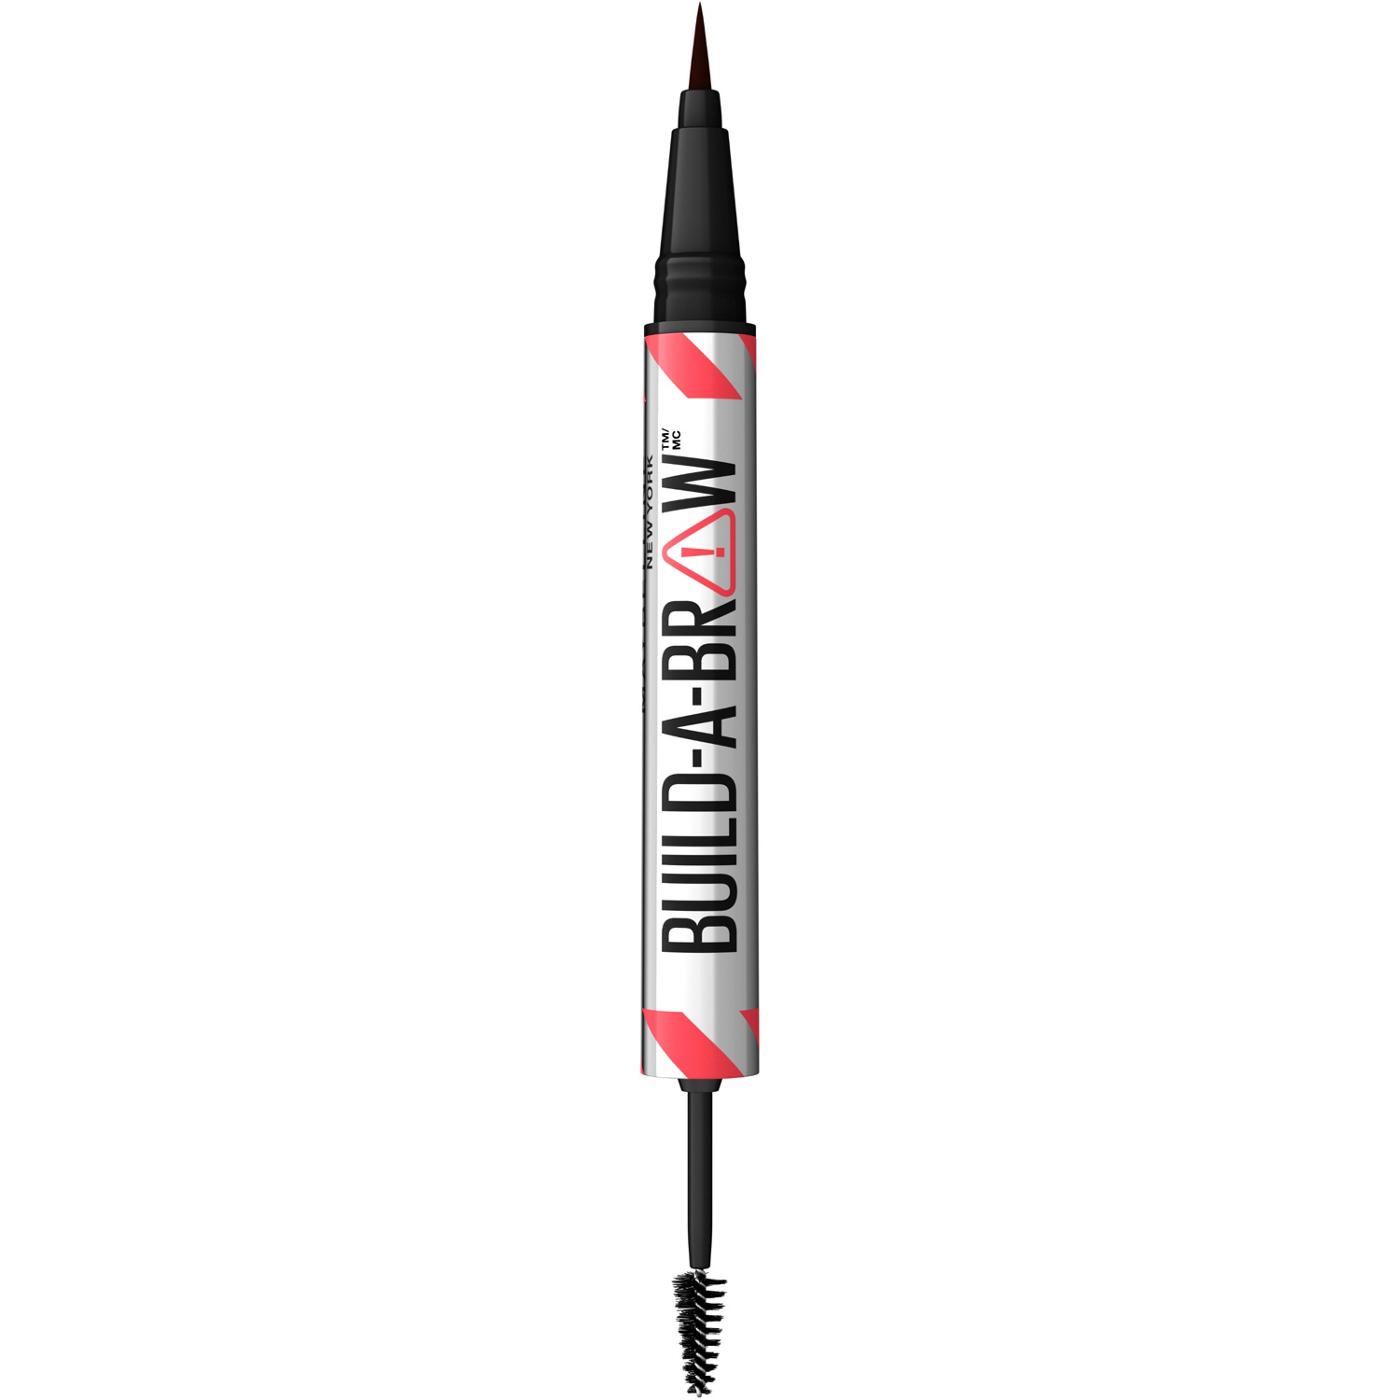 Maybelline Build A Brow 2 In 1 Brow Pen - Ash Brown; image 1 of 17